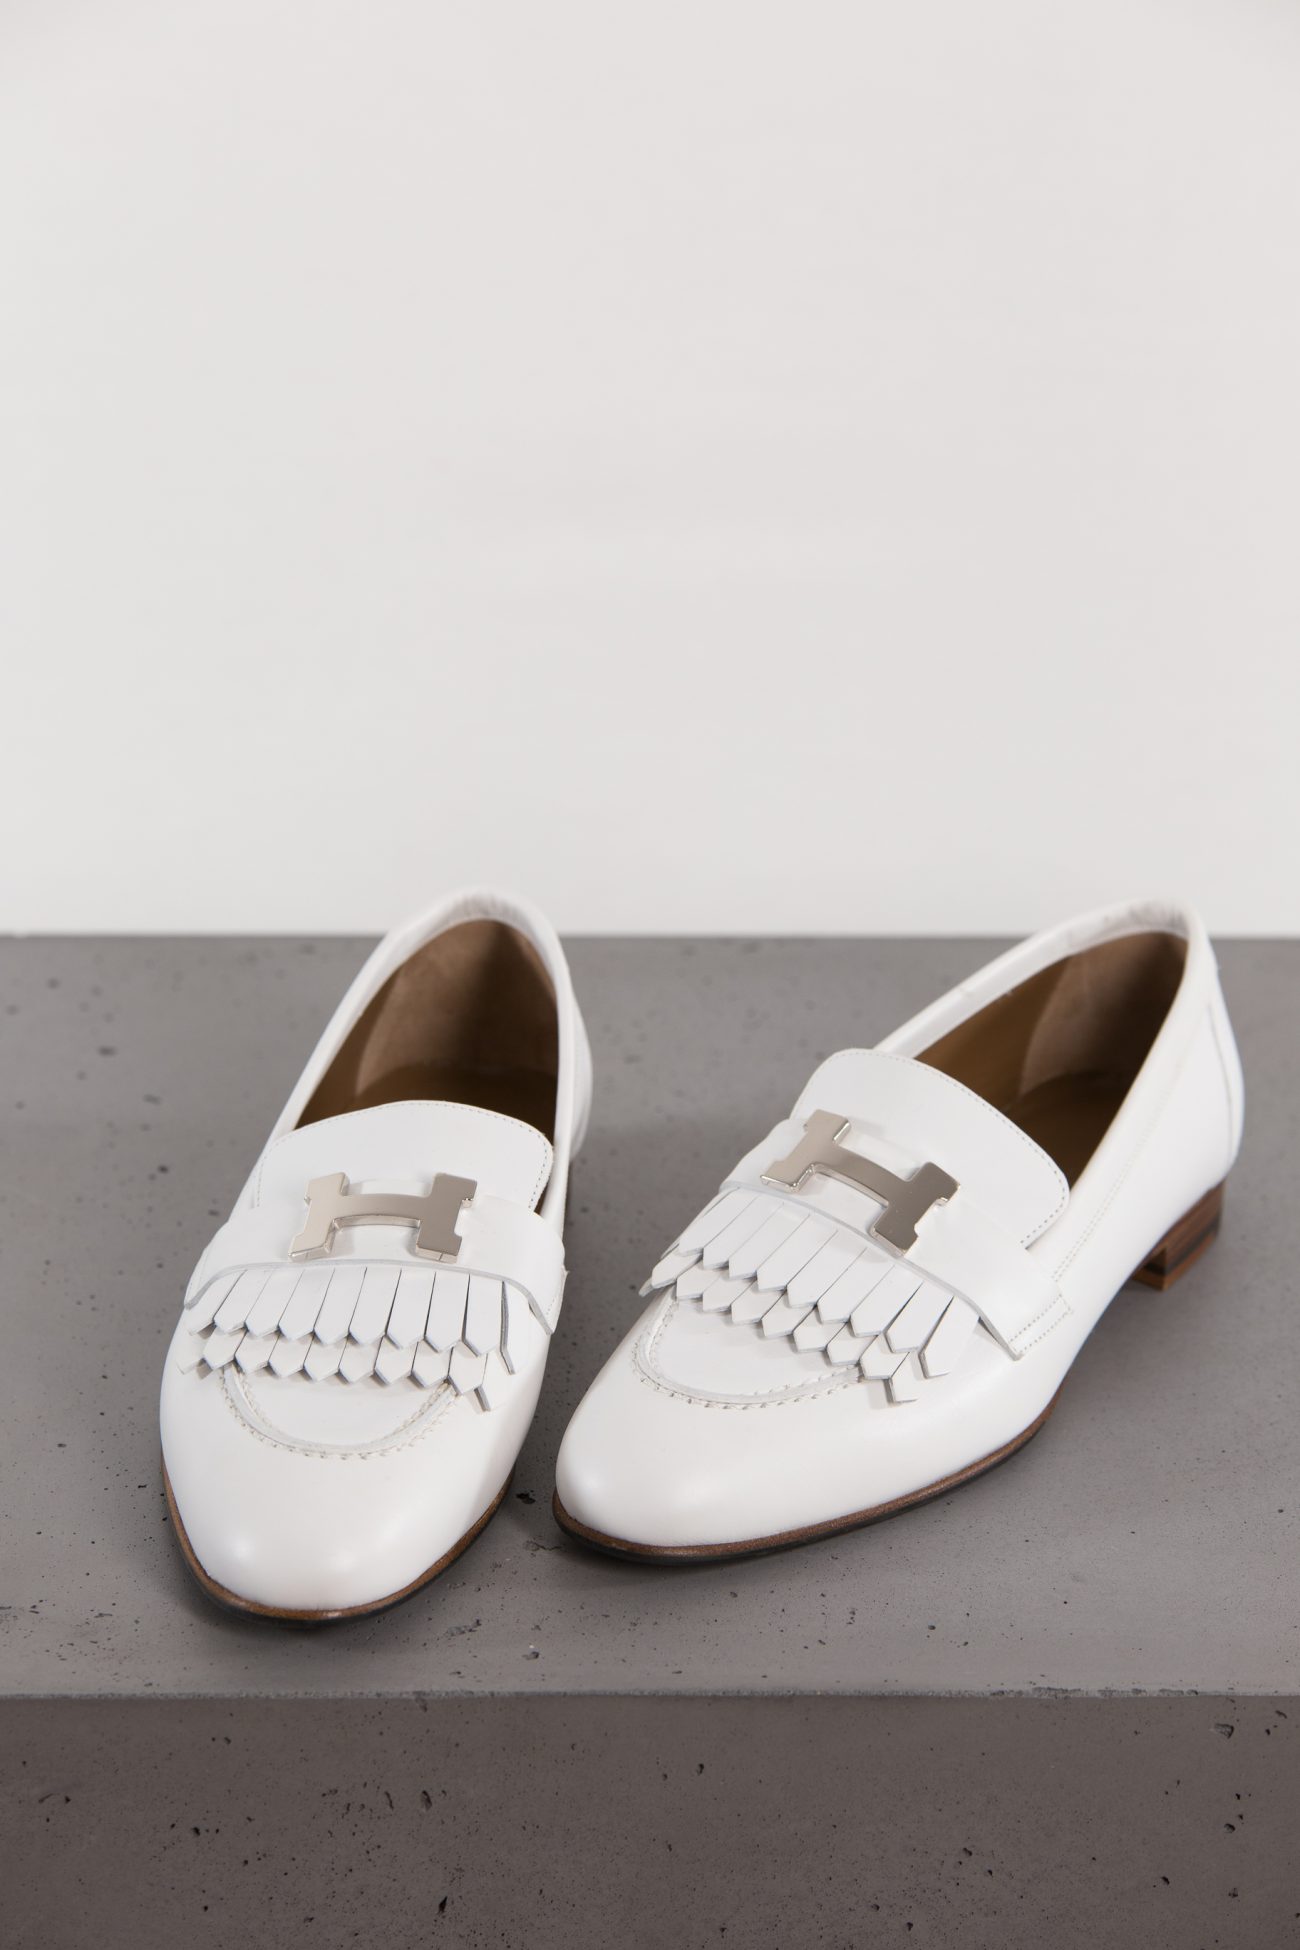 Hermes Shoes, 36.5 - Huntessa Luxury Online Consignment Boutique